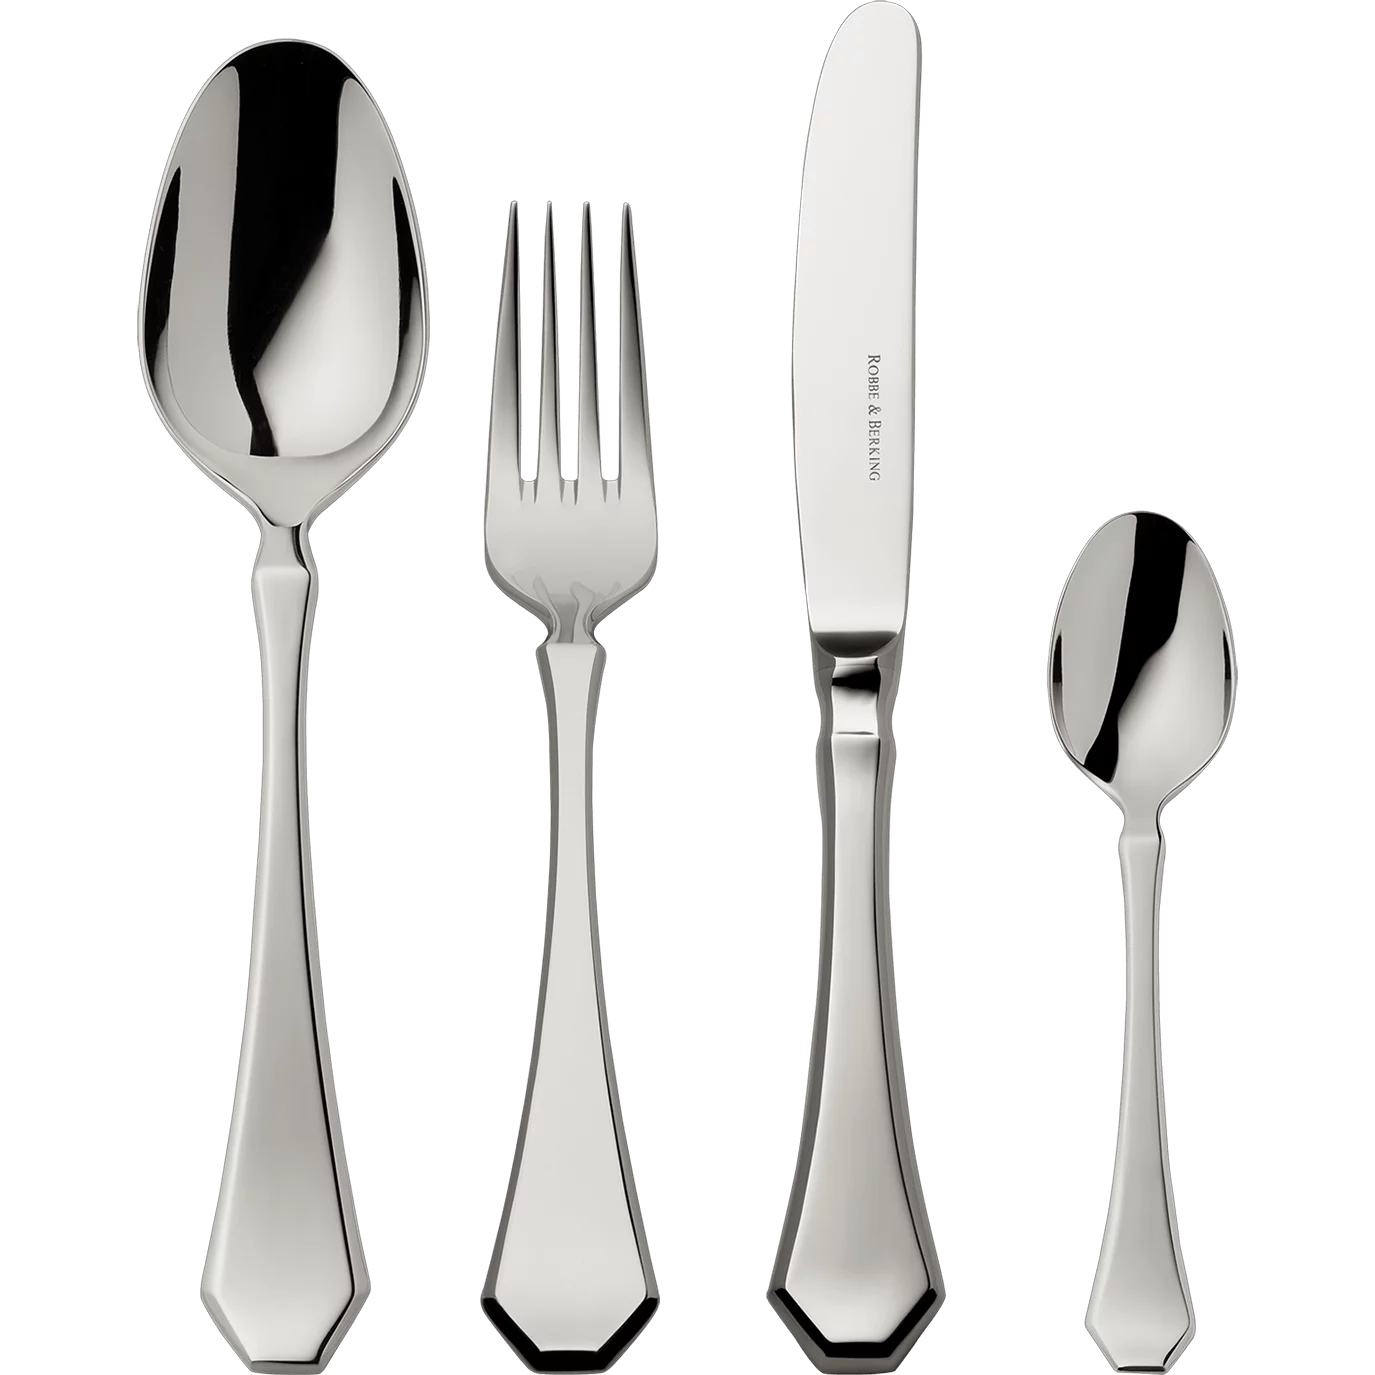 Baltic 4-piece set (18/8 stainless steel)